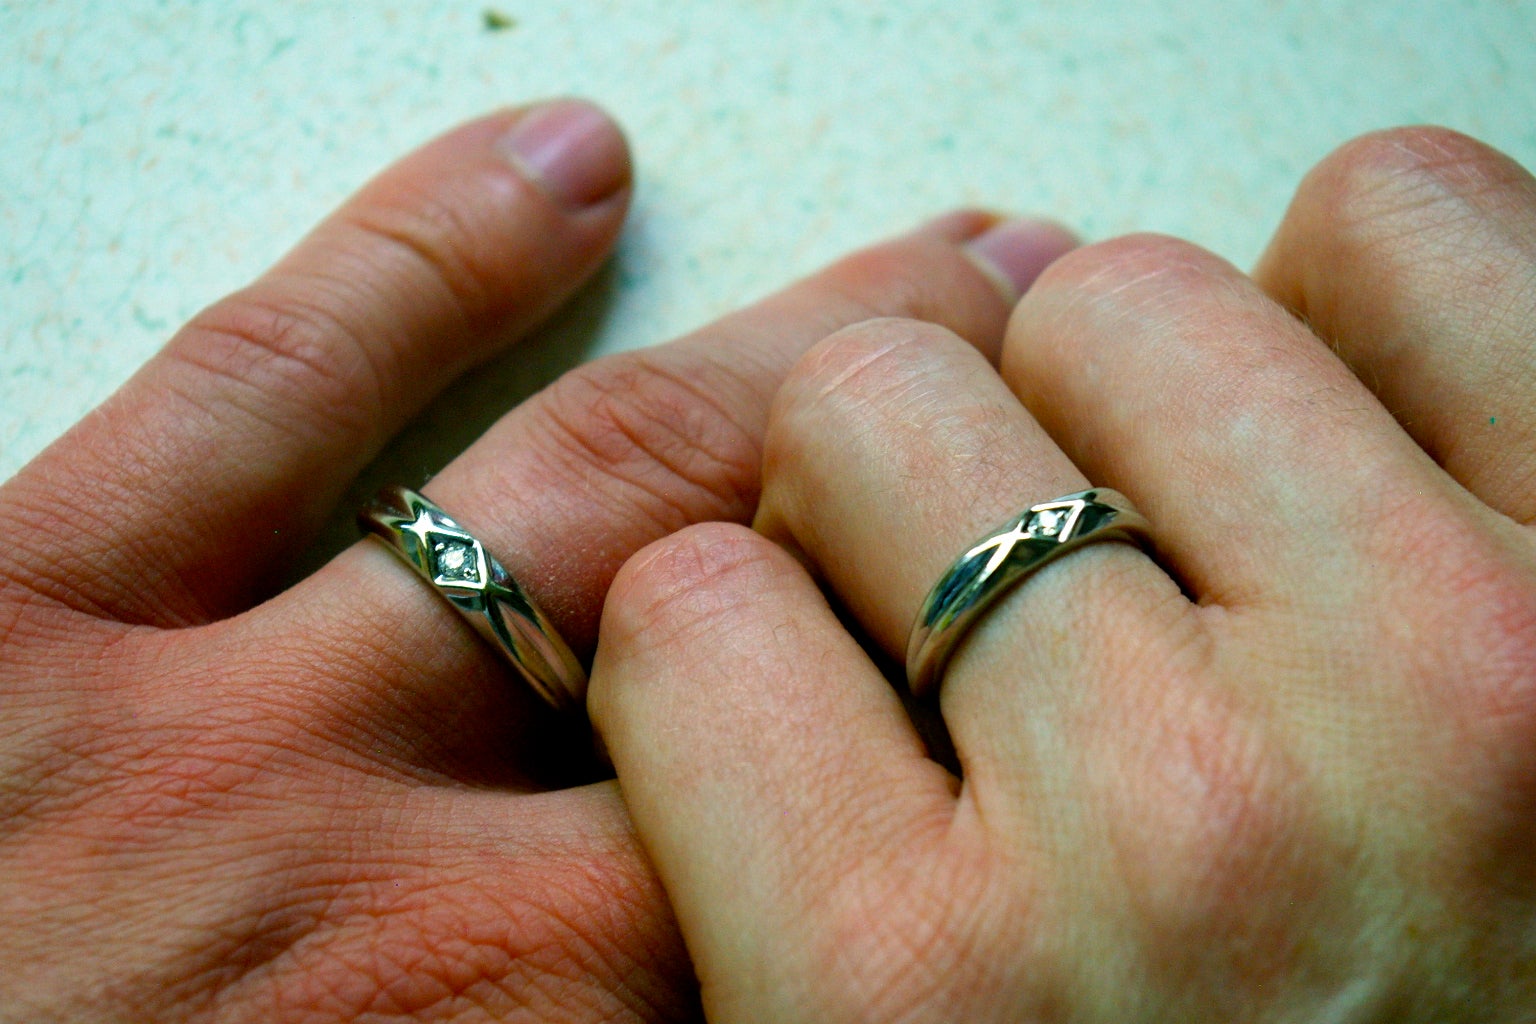 Two hands with matching wedding rings holding each other.